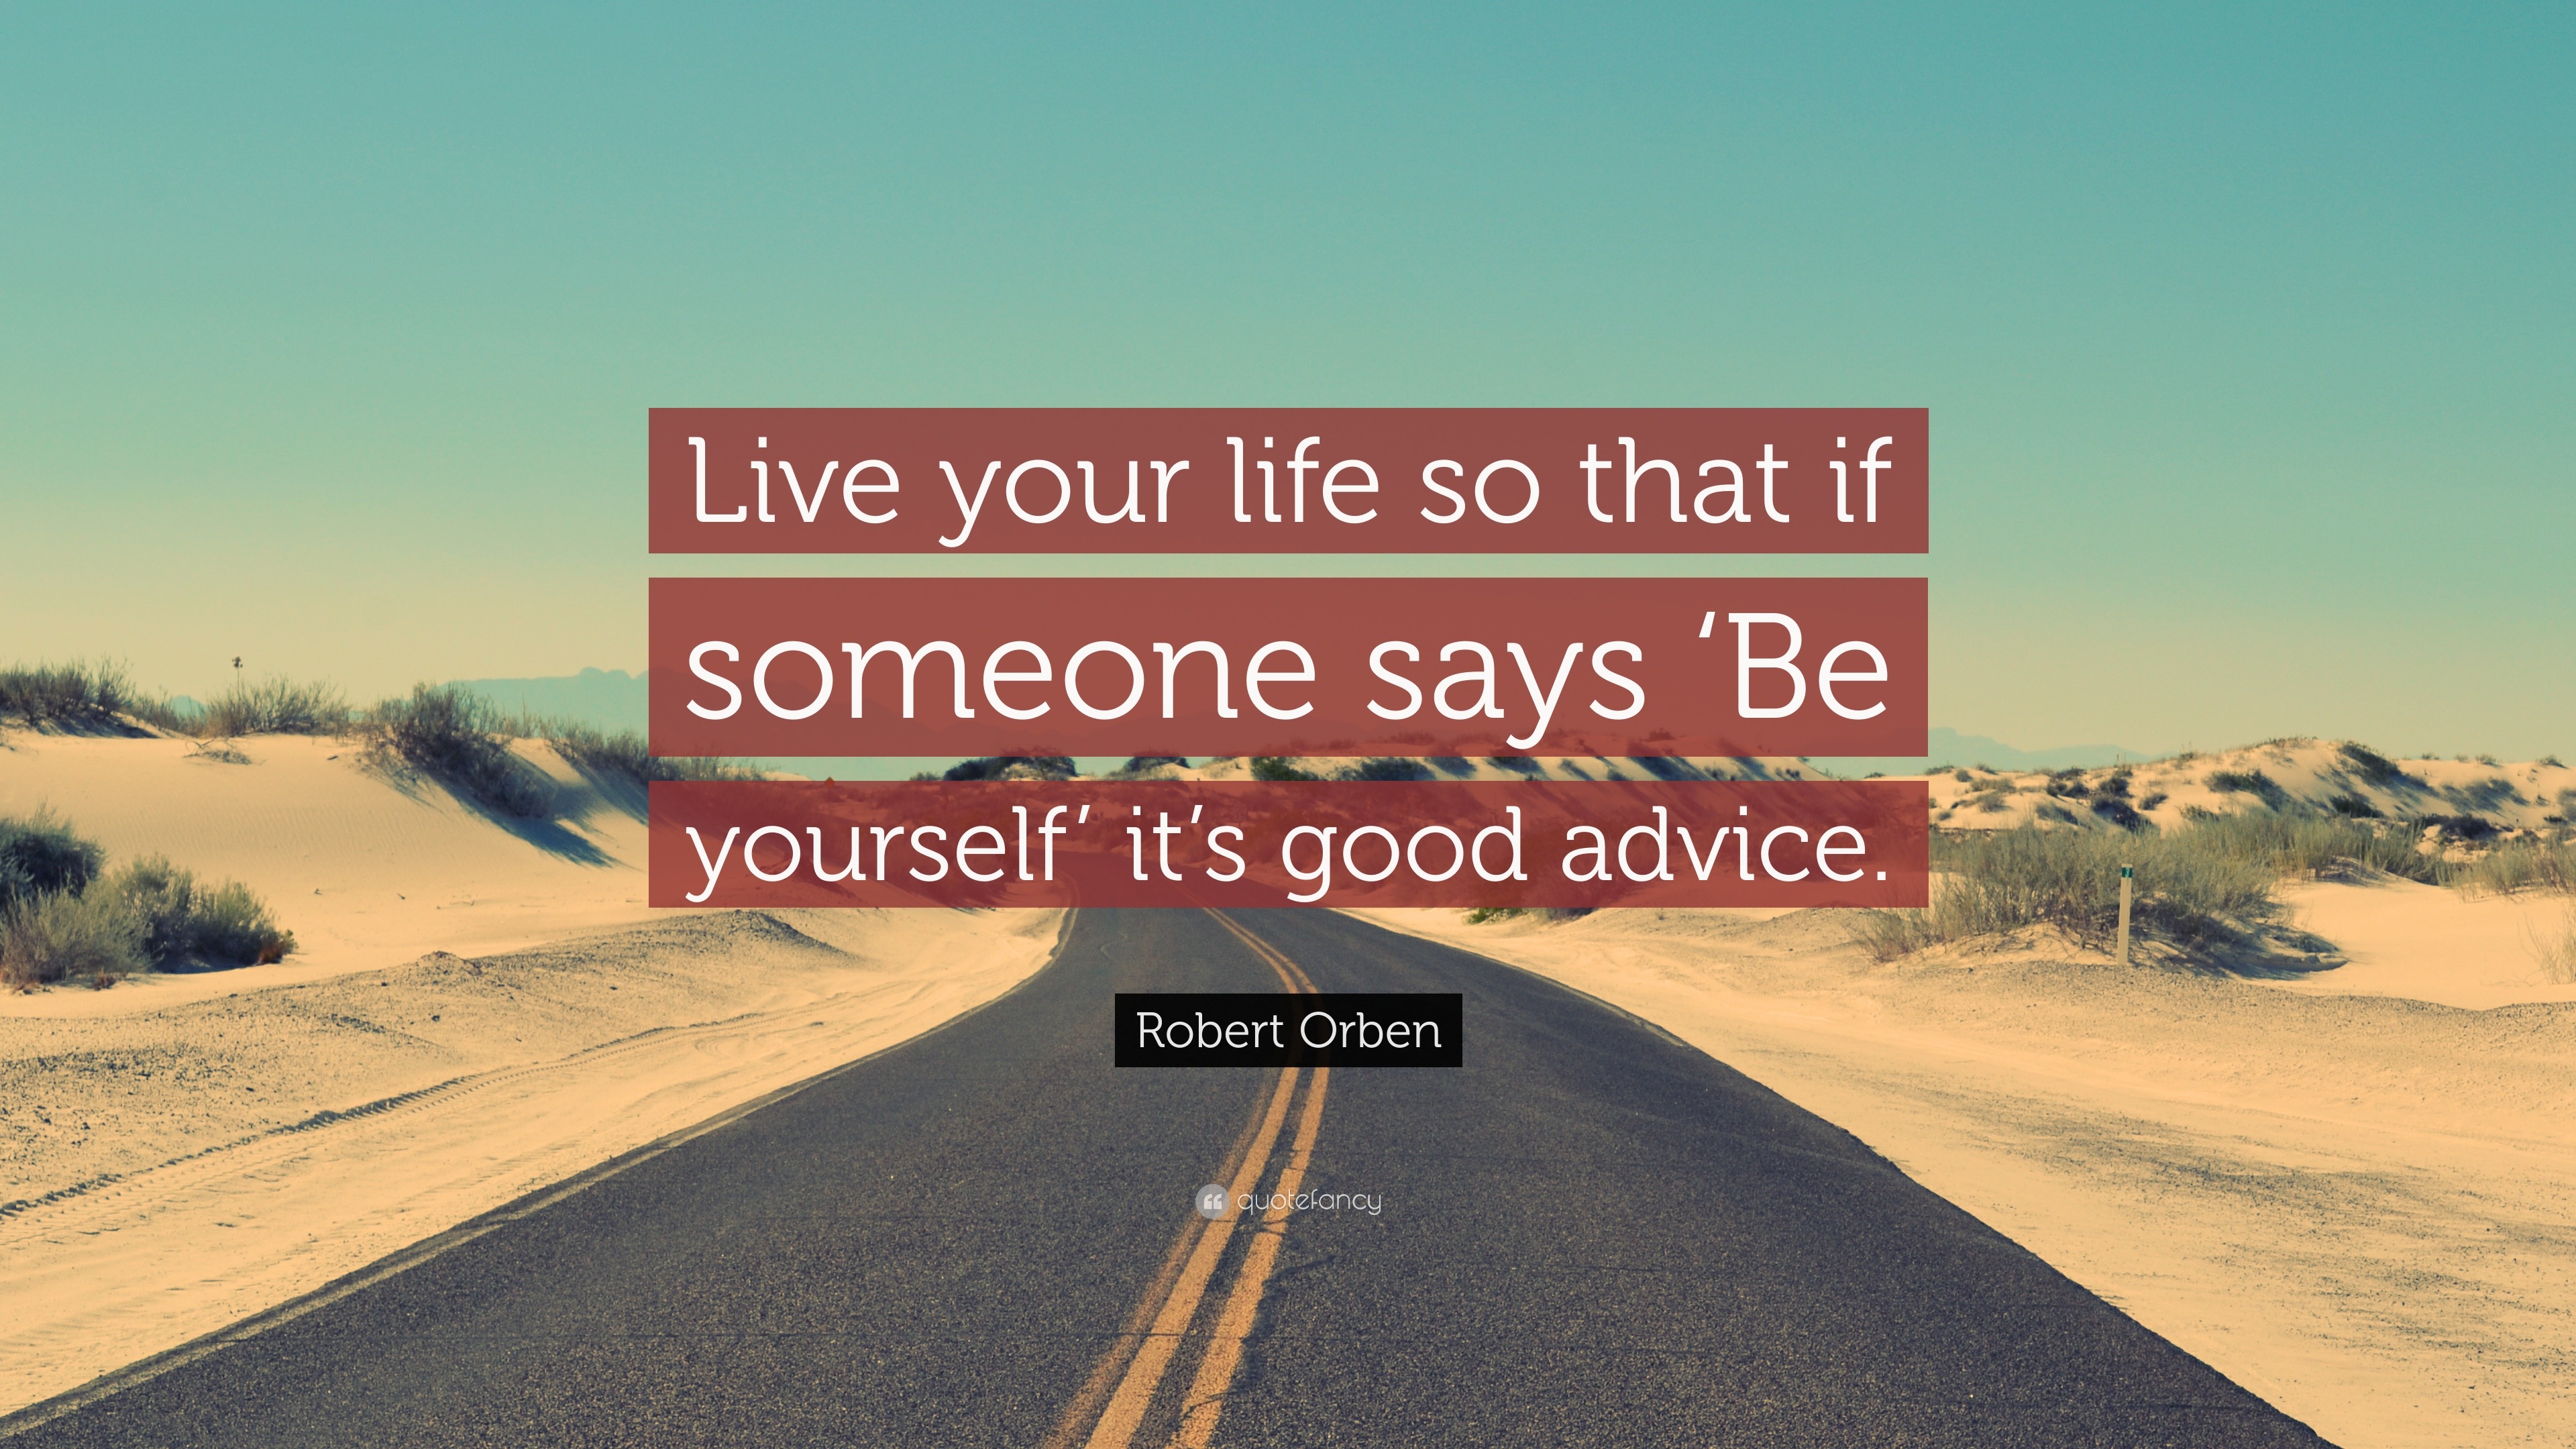 Robert Orben Quote: “Live your life so that if someone says ‘Be